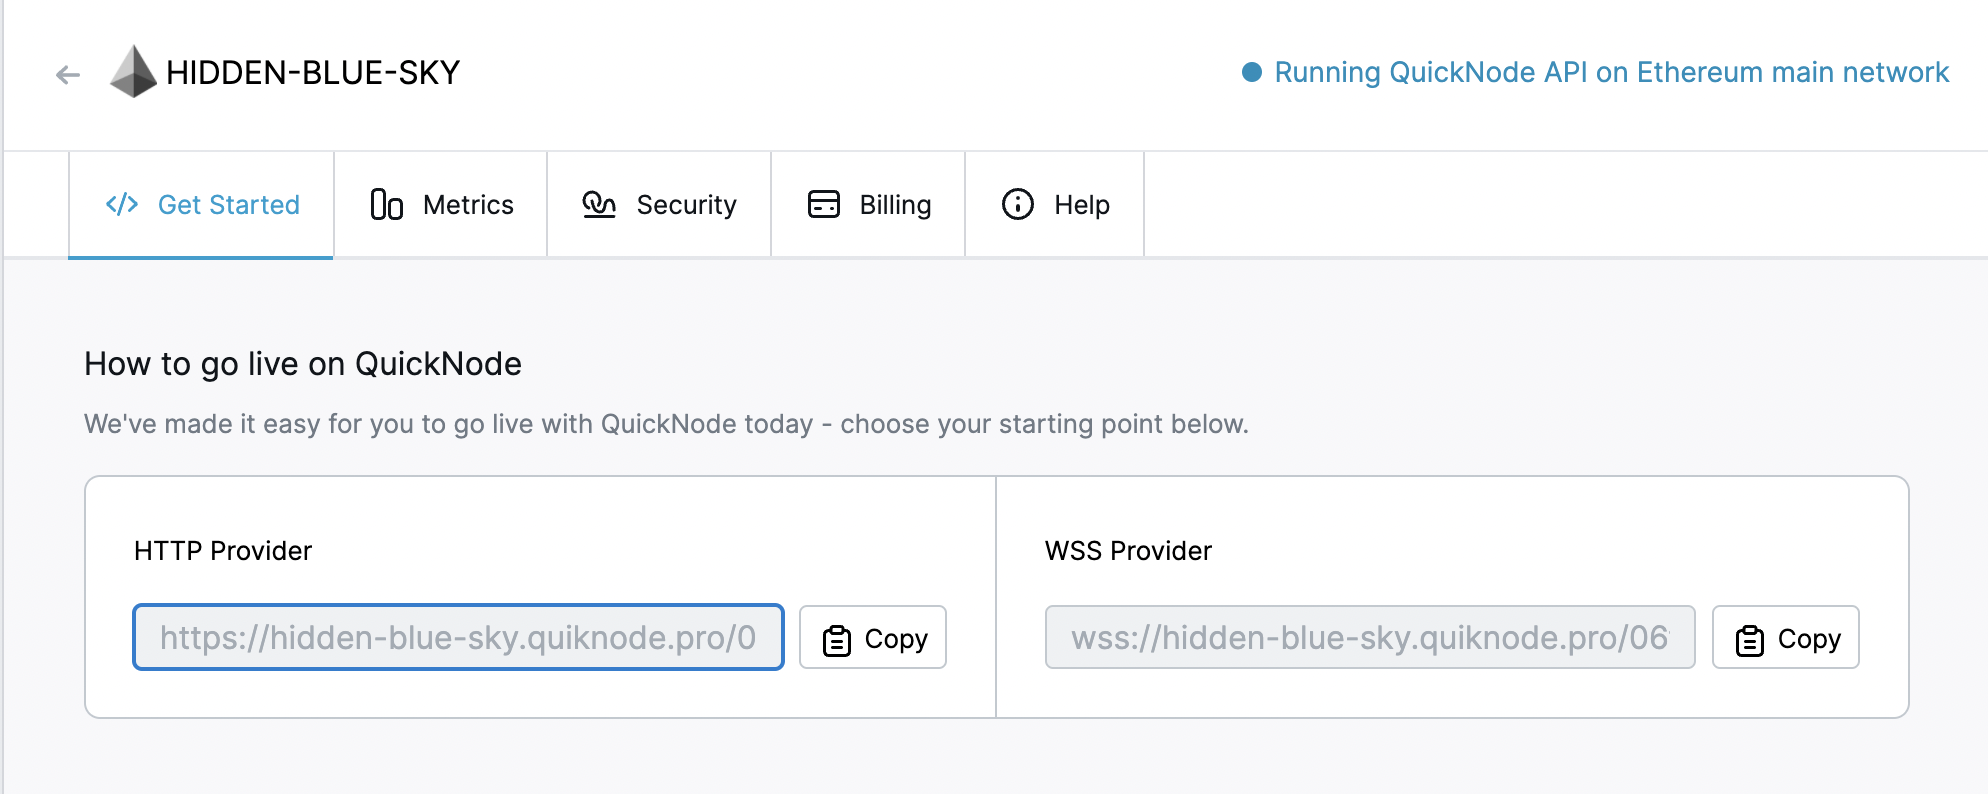 A screenshot of the Quicknode Ethereum endpoint on the Getting Started page with an HTTP link and WSS